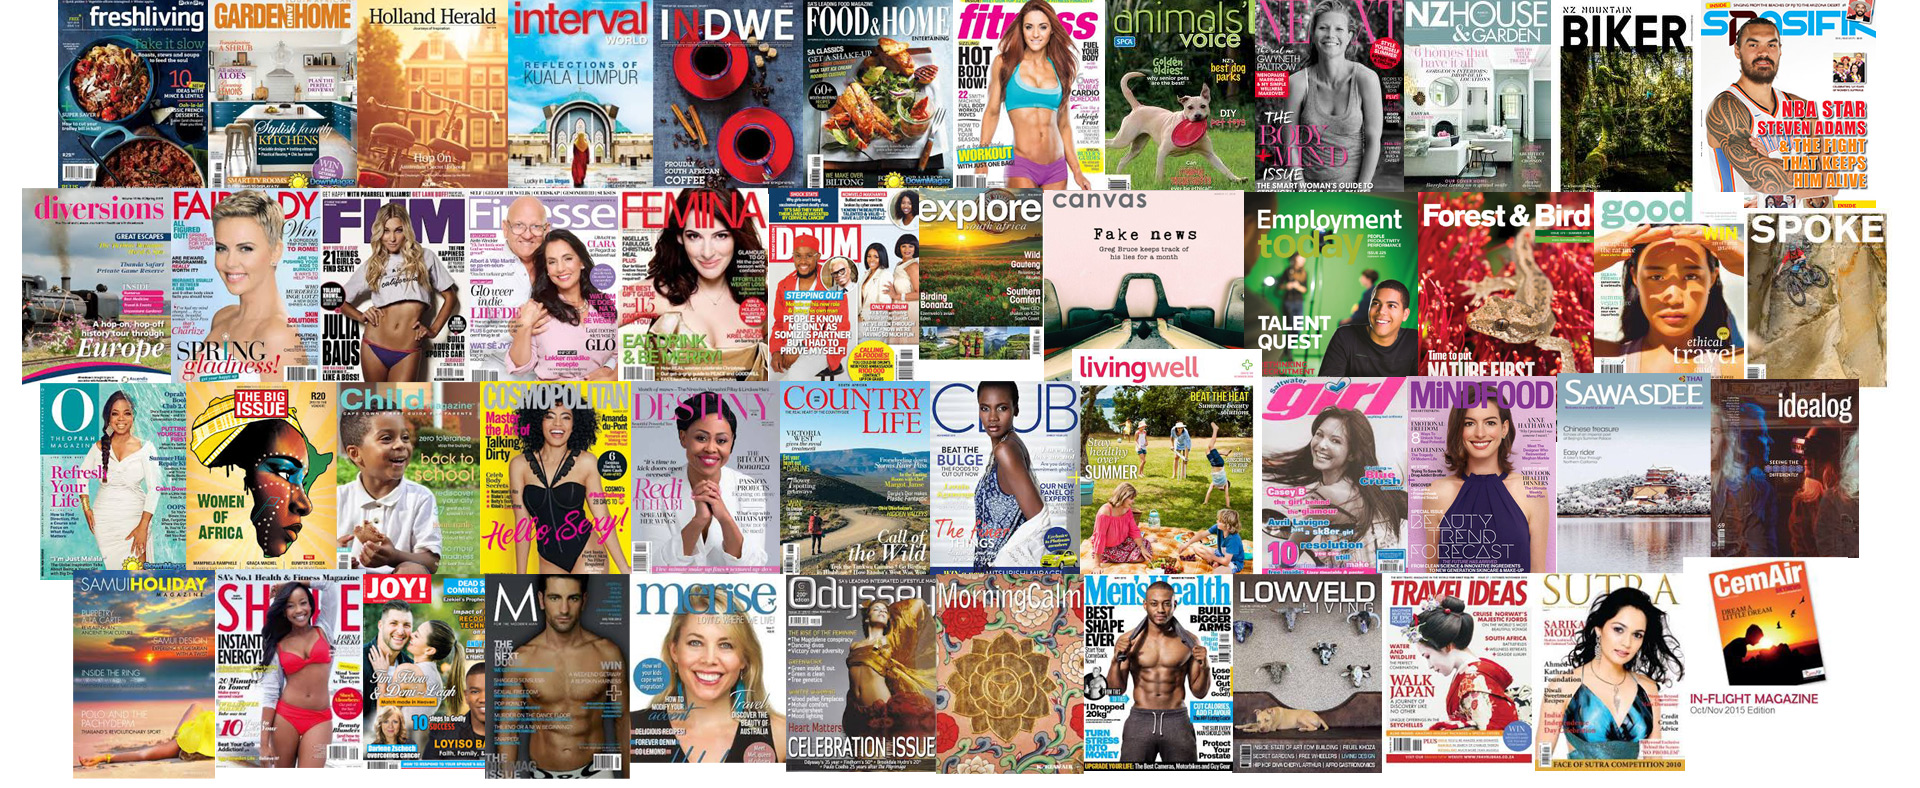 Journalism writing course publishing successes in magazines worldwide